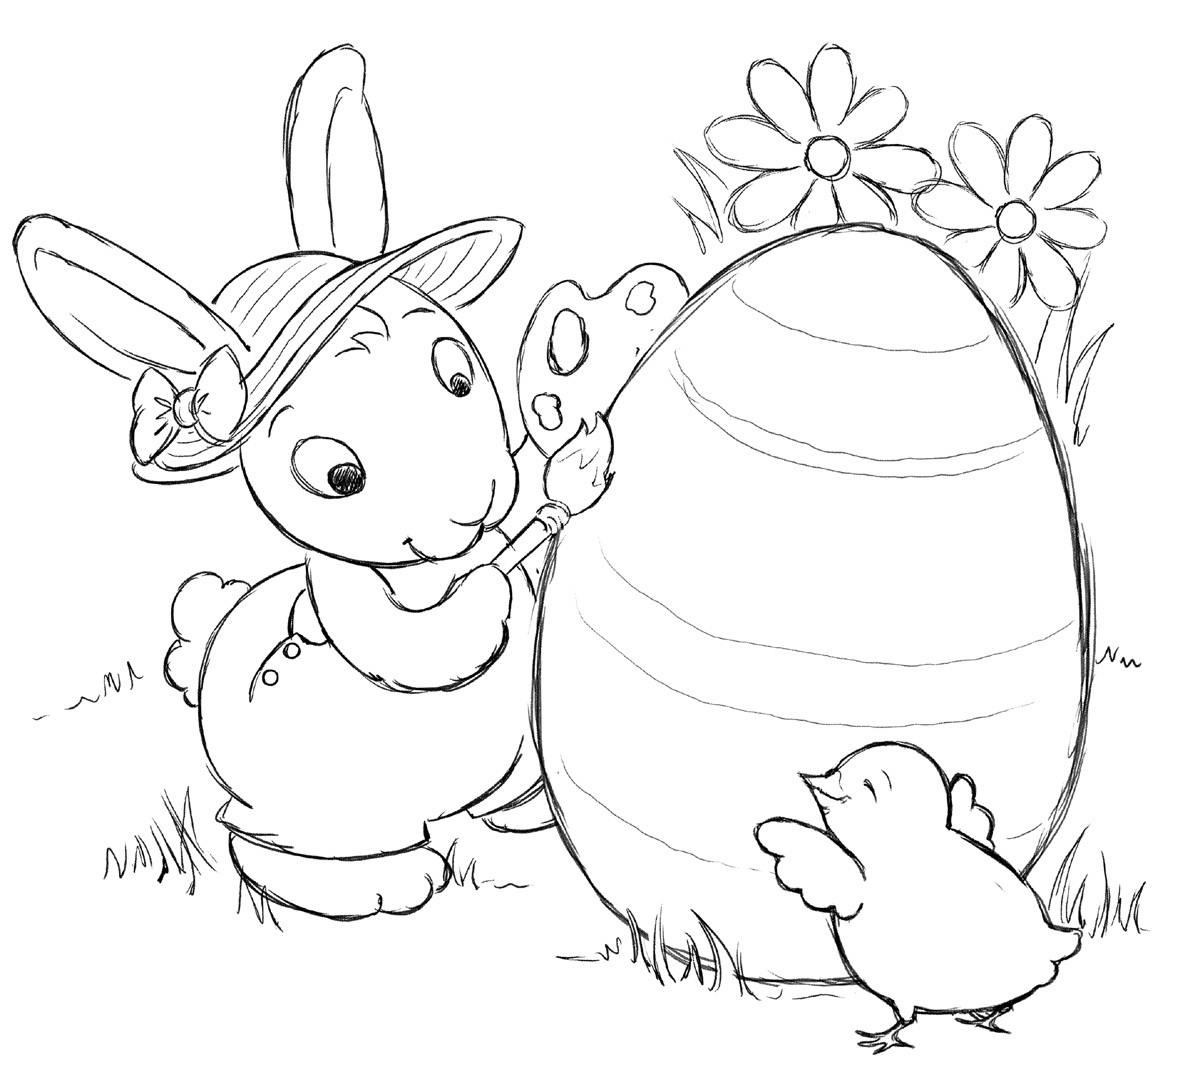 35-best-easter-bunny-coloring-pages-we-need-fun